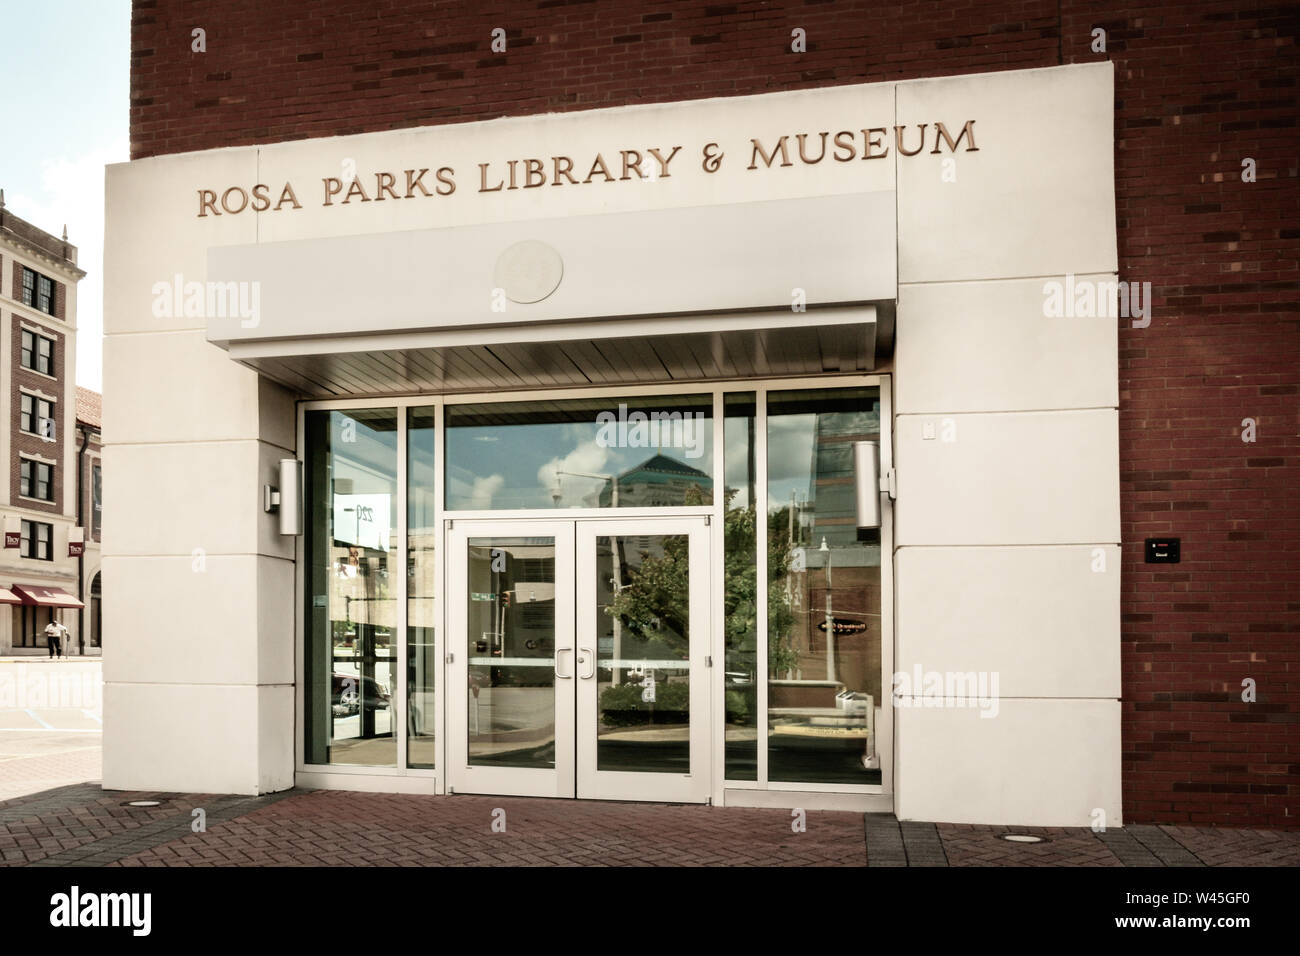 The Building Entrance for the Rosa Parks Library & Museum located downtown in Montgomery, AL, USA Stock Photo